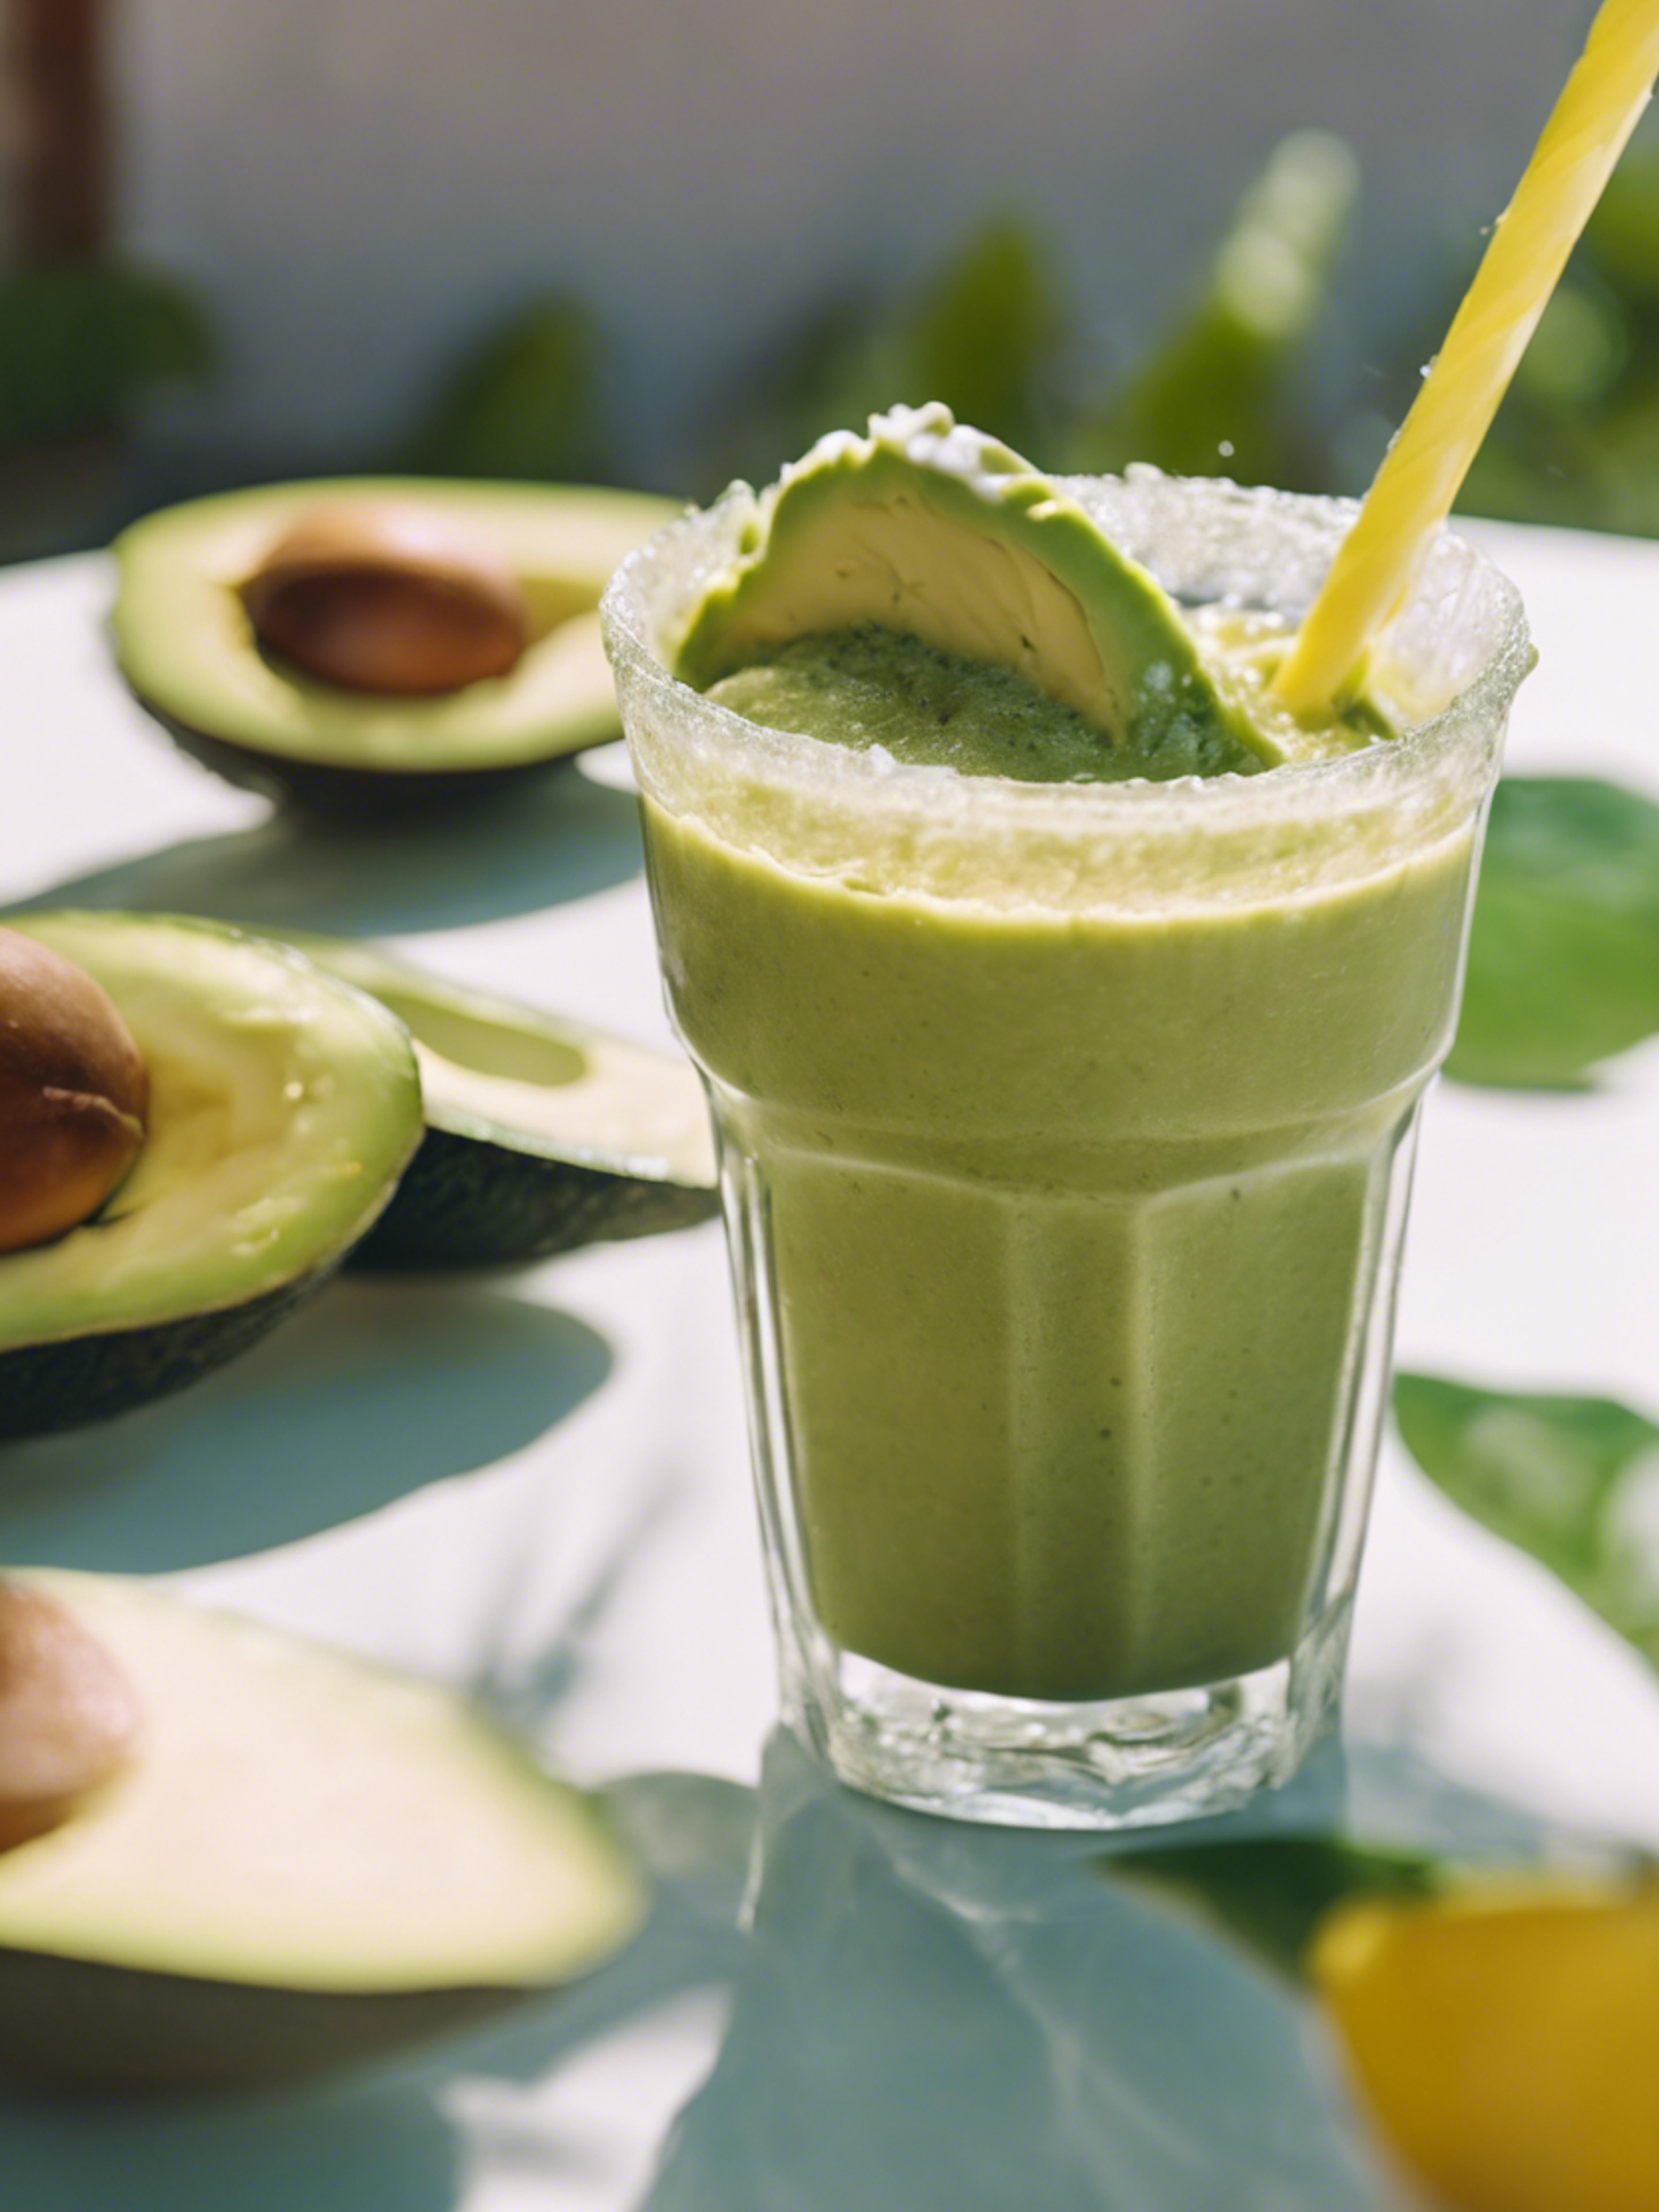 A playful avocado sipping on tropical smoothie on a hot summer day Fond d'écran[3b128a2f6f1a4fb38d08]